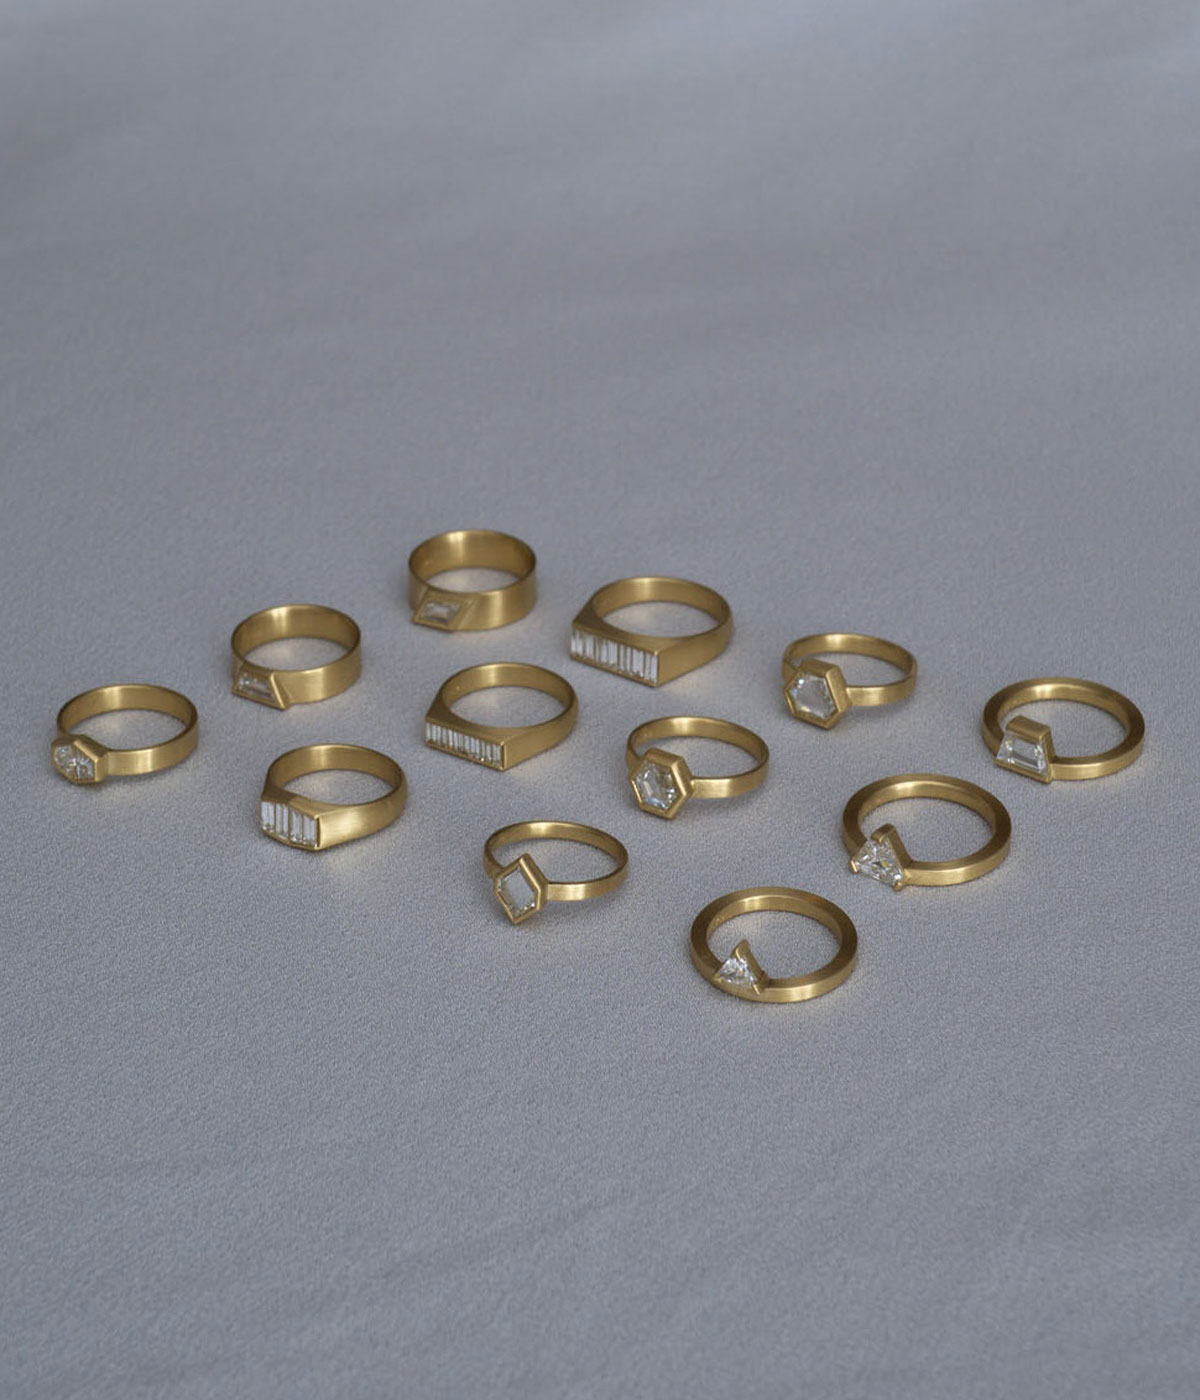 Selection of gold diamond rings against a grey backdrop